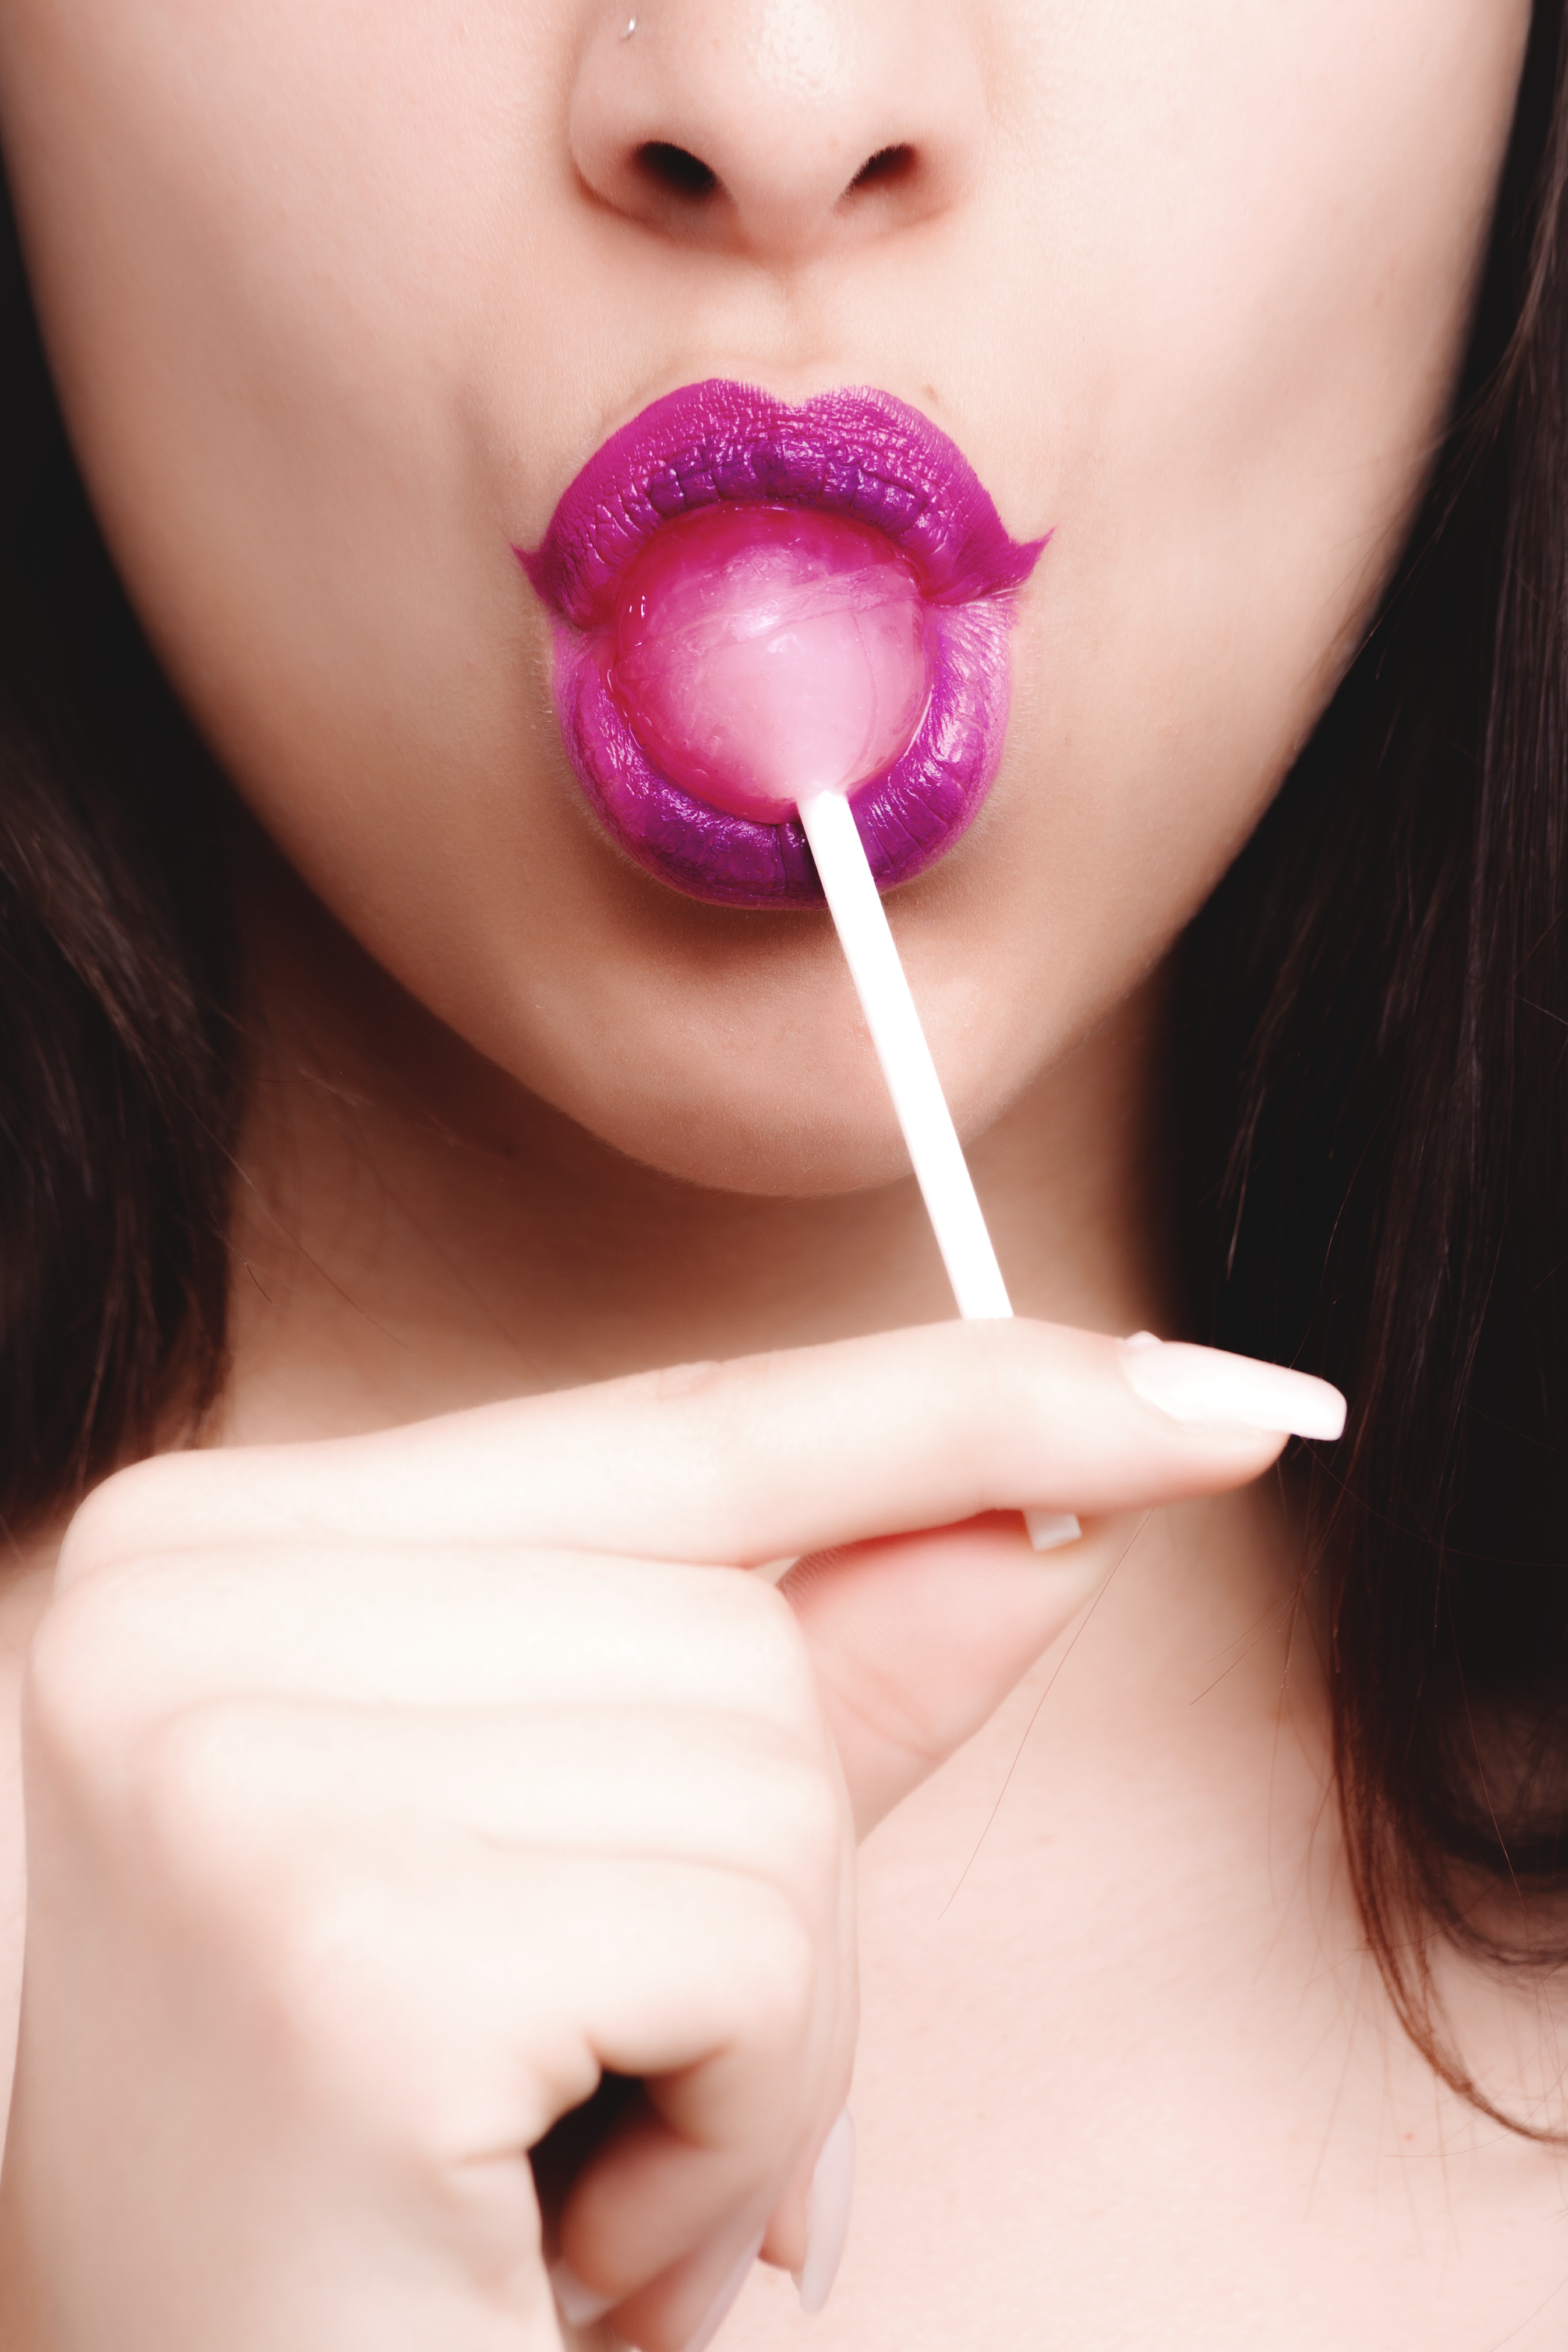 Woman With Pink Lipstick Licking Strawberry Lollipop, Close -up, Face, Fashion, Girl, HQ Photo